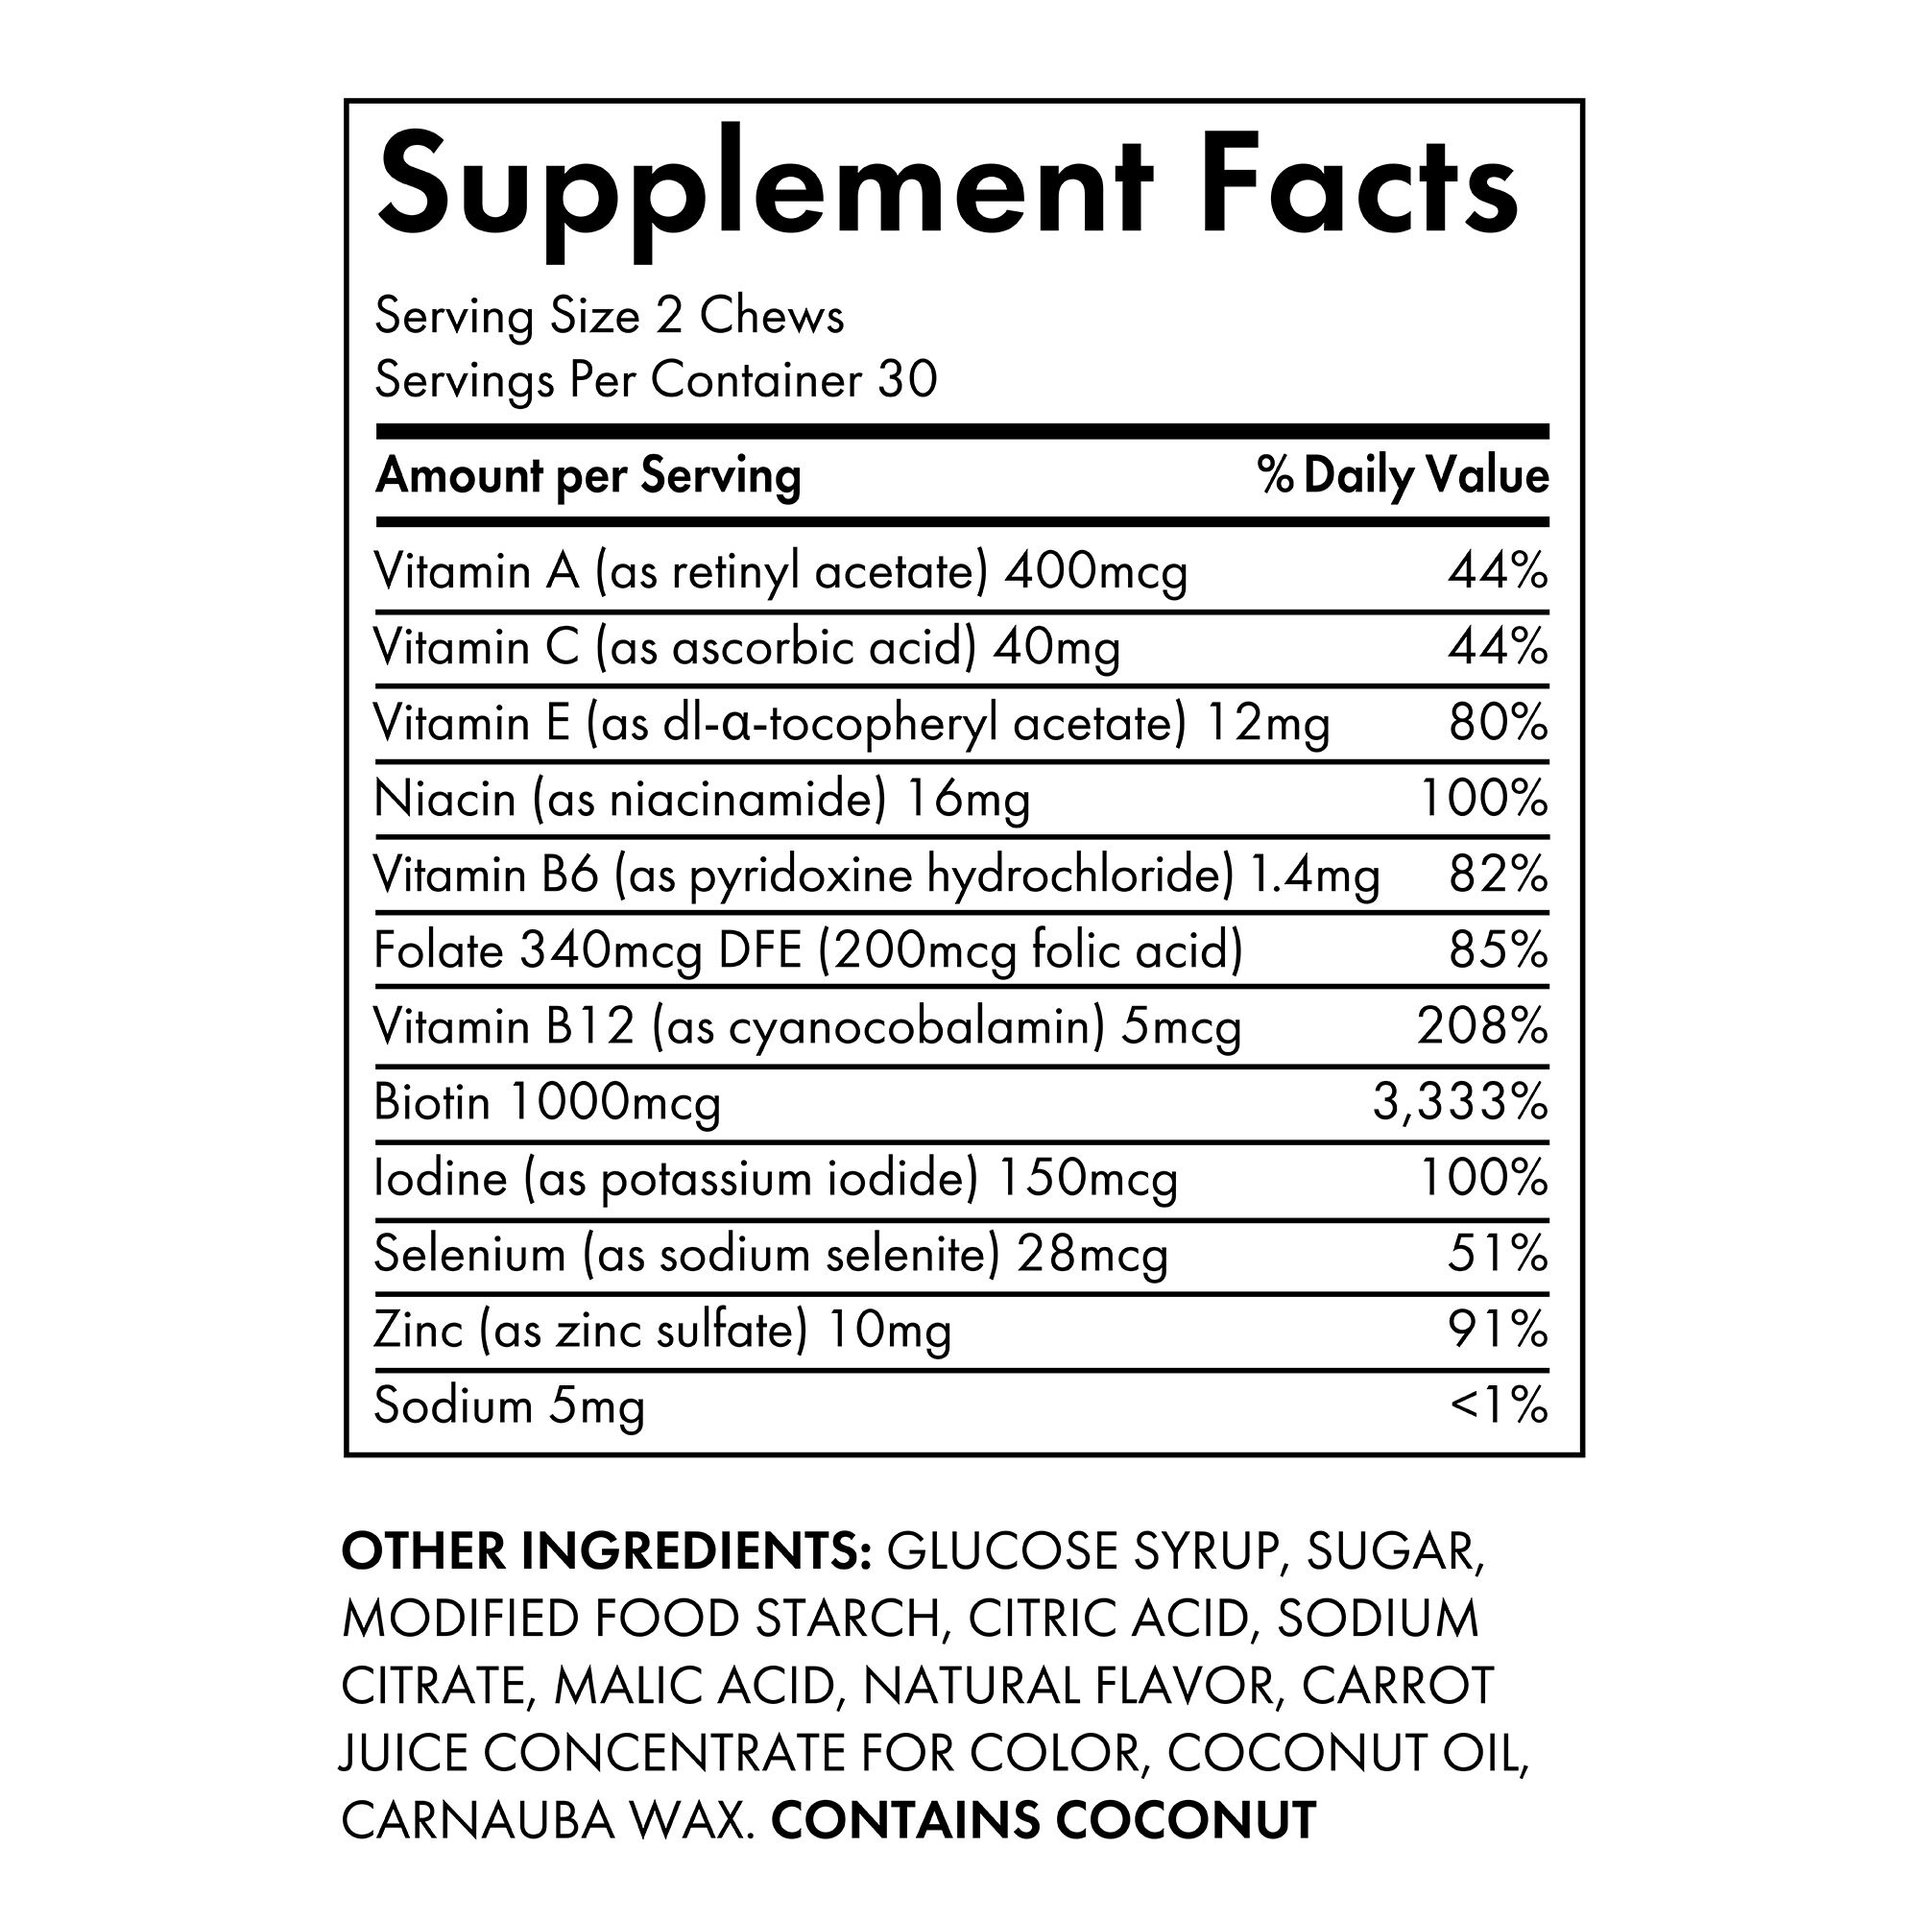 US Goody 2 Chews supplement table